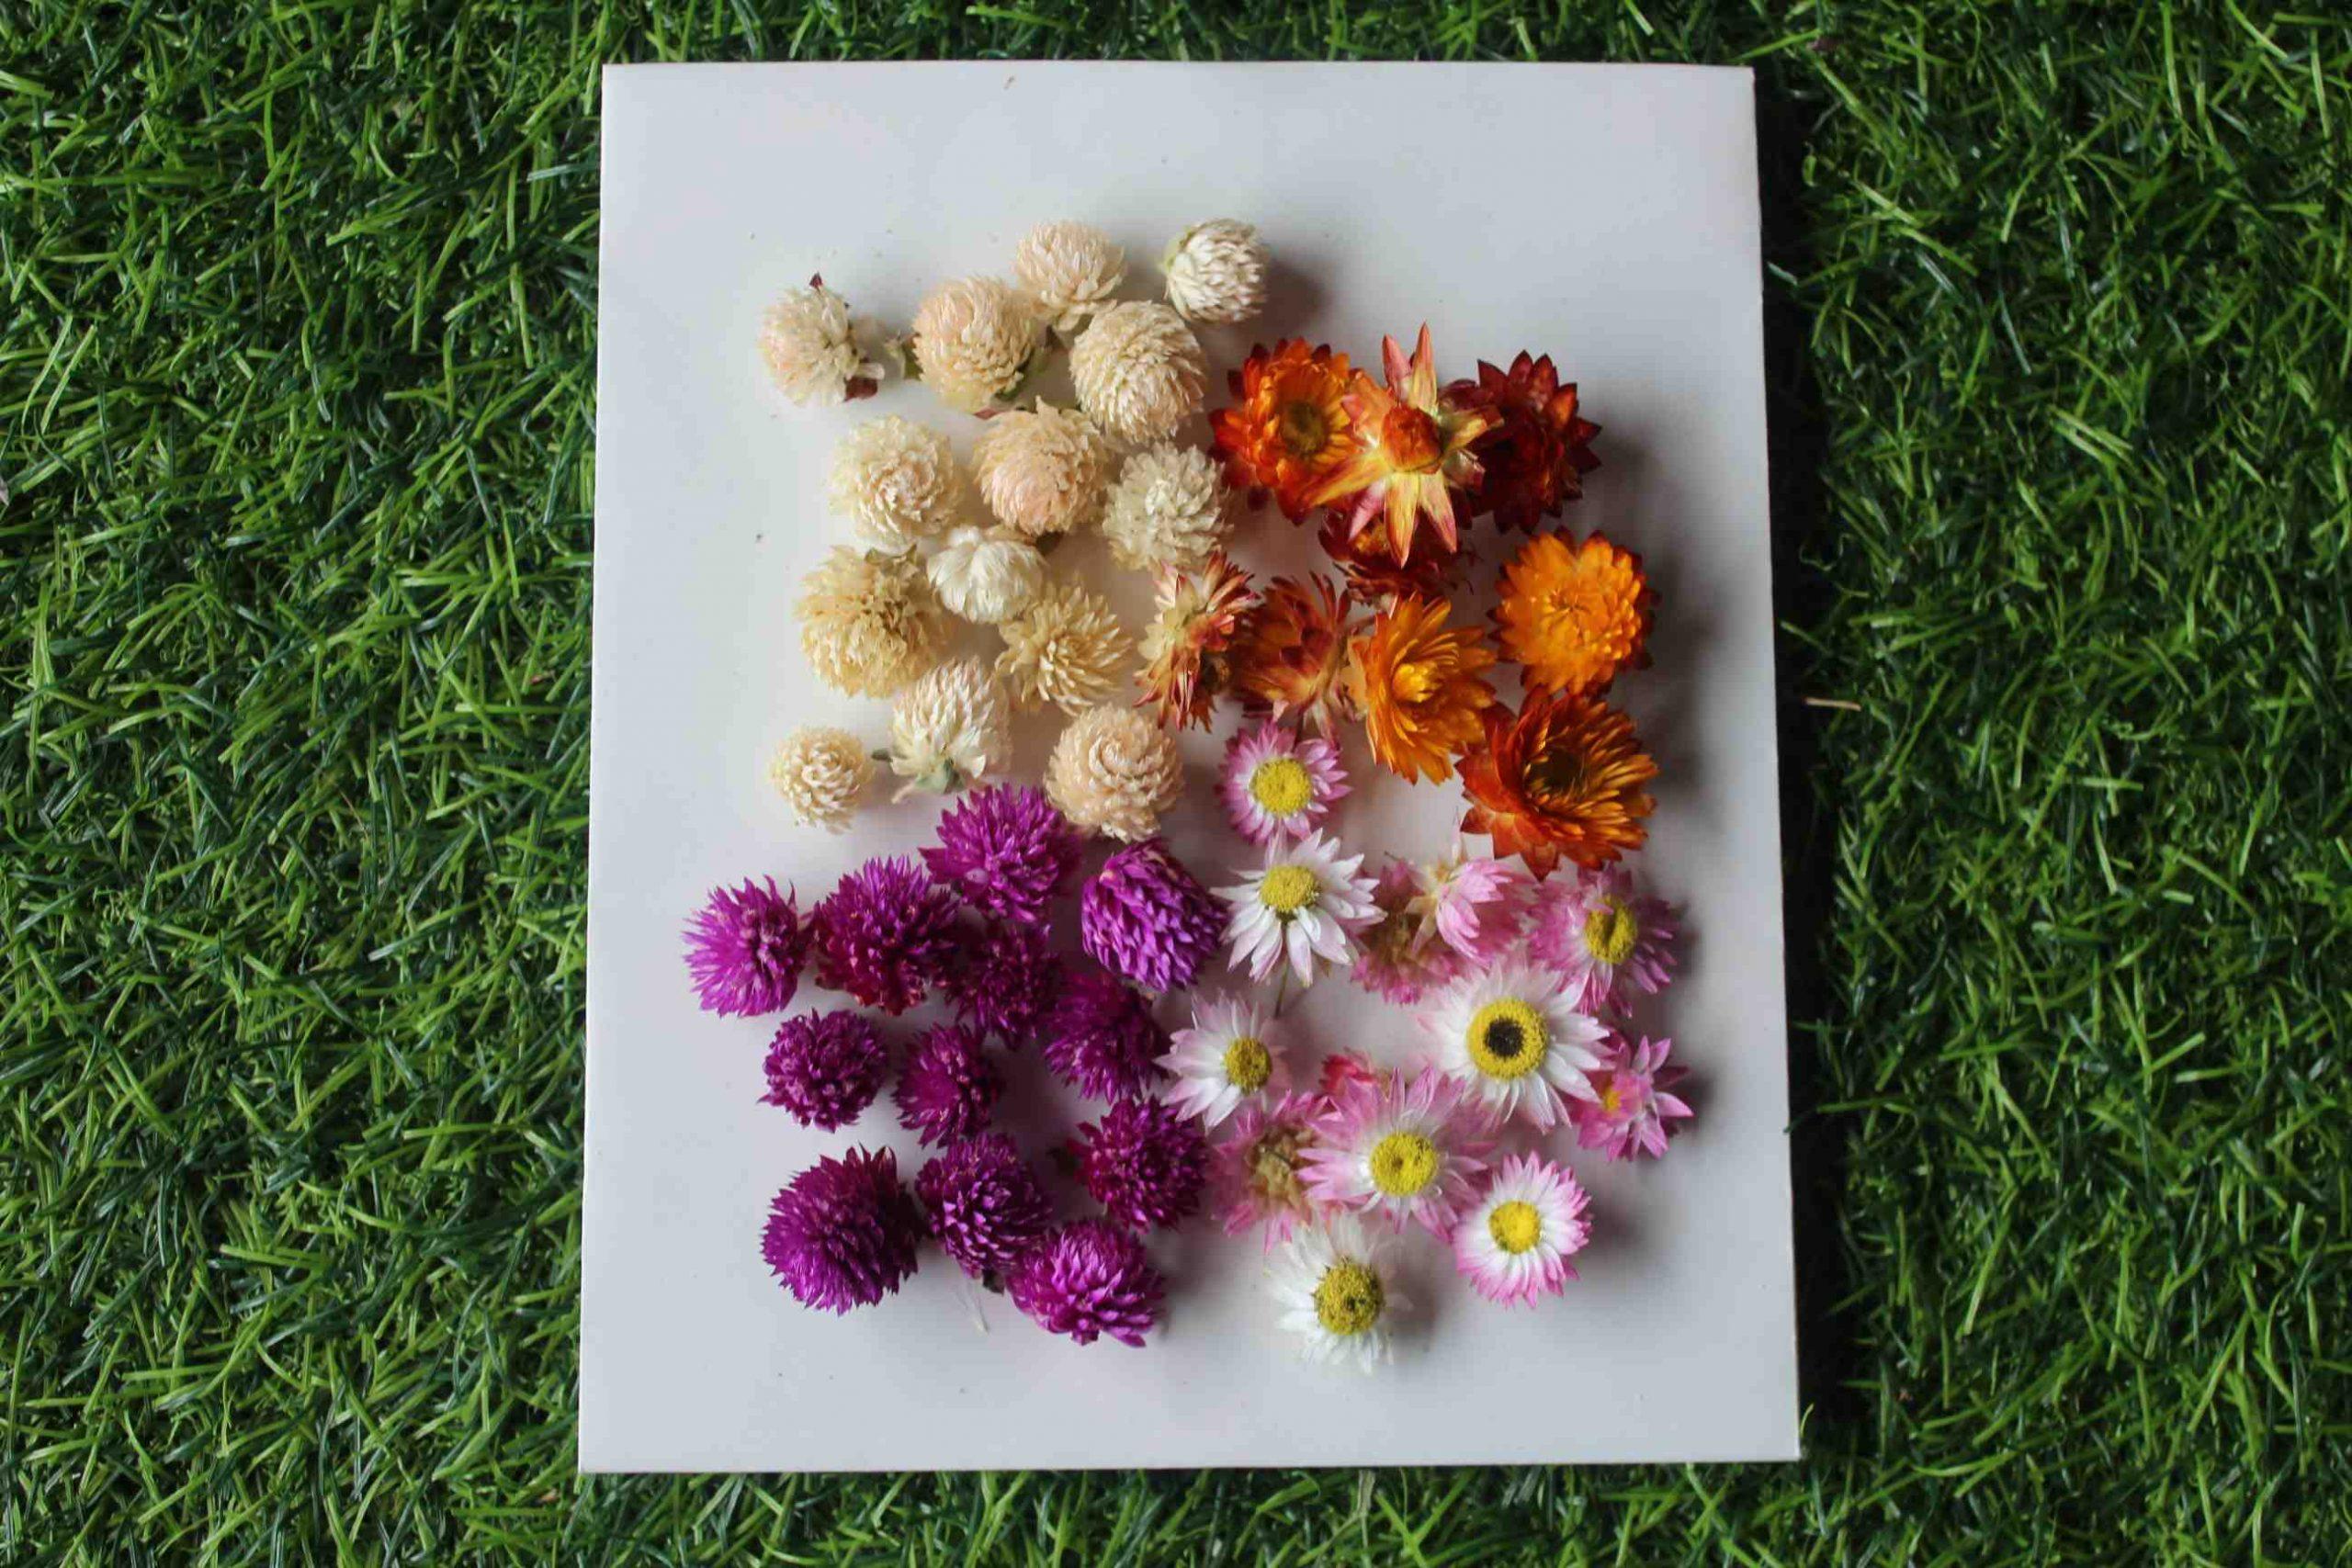 Buy Set of 20 Dried flowers For Resin Art - BloomyBliss